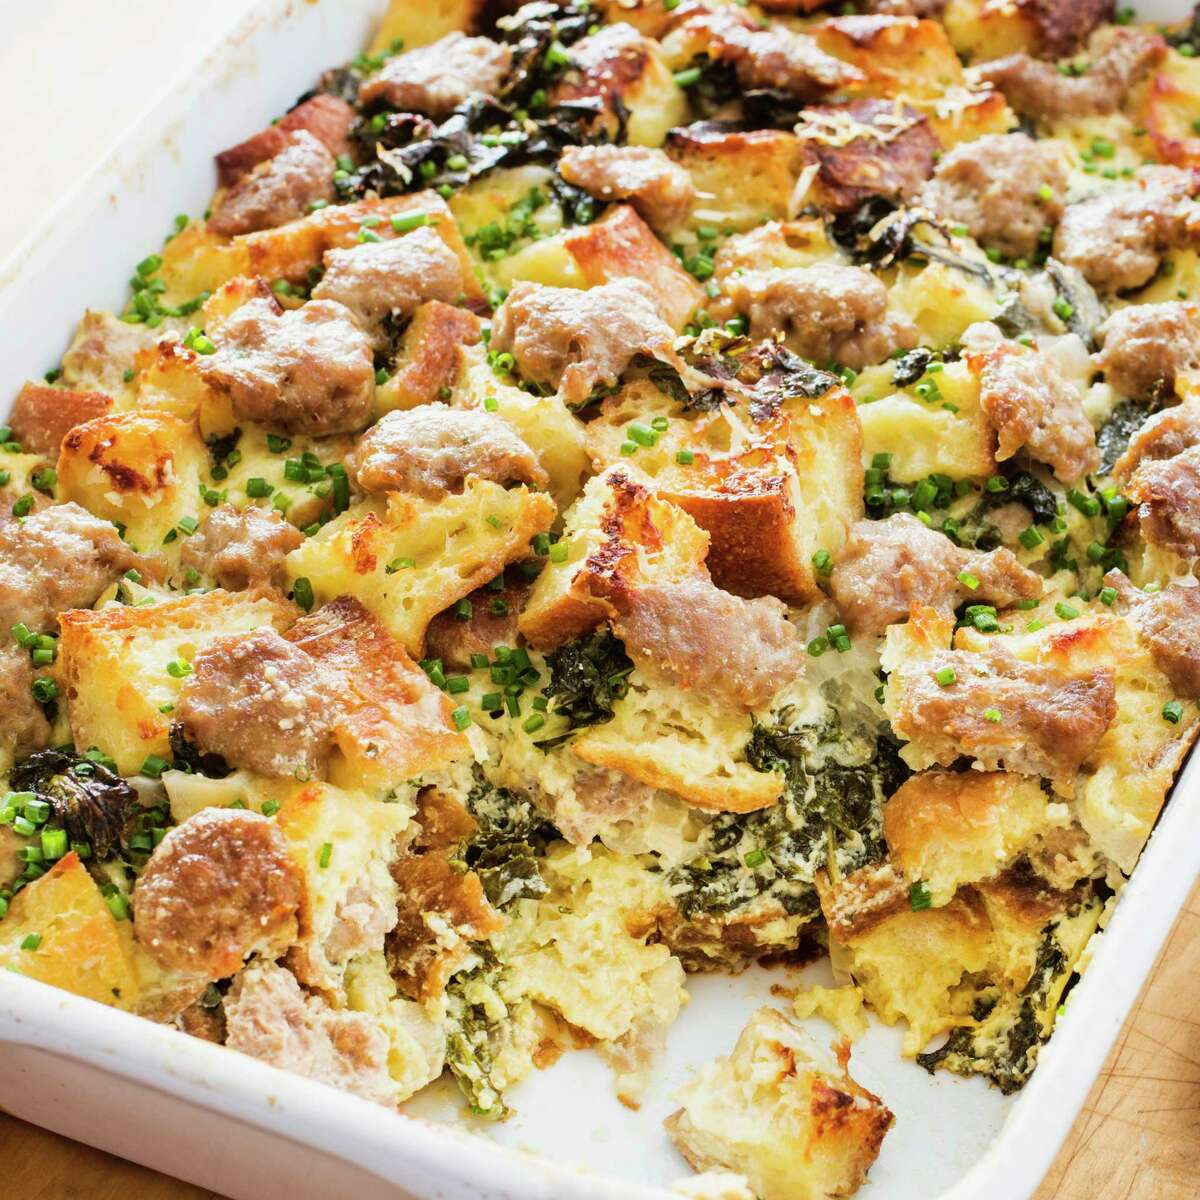 Savory Bread Pudding in Brookline, Mass. This recipe appears in the cookbook "All-Time Best Brunch." (Daniel J. van Ackere/America's Test Kitchen via AP)